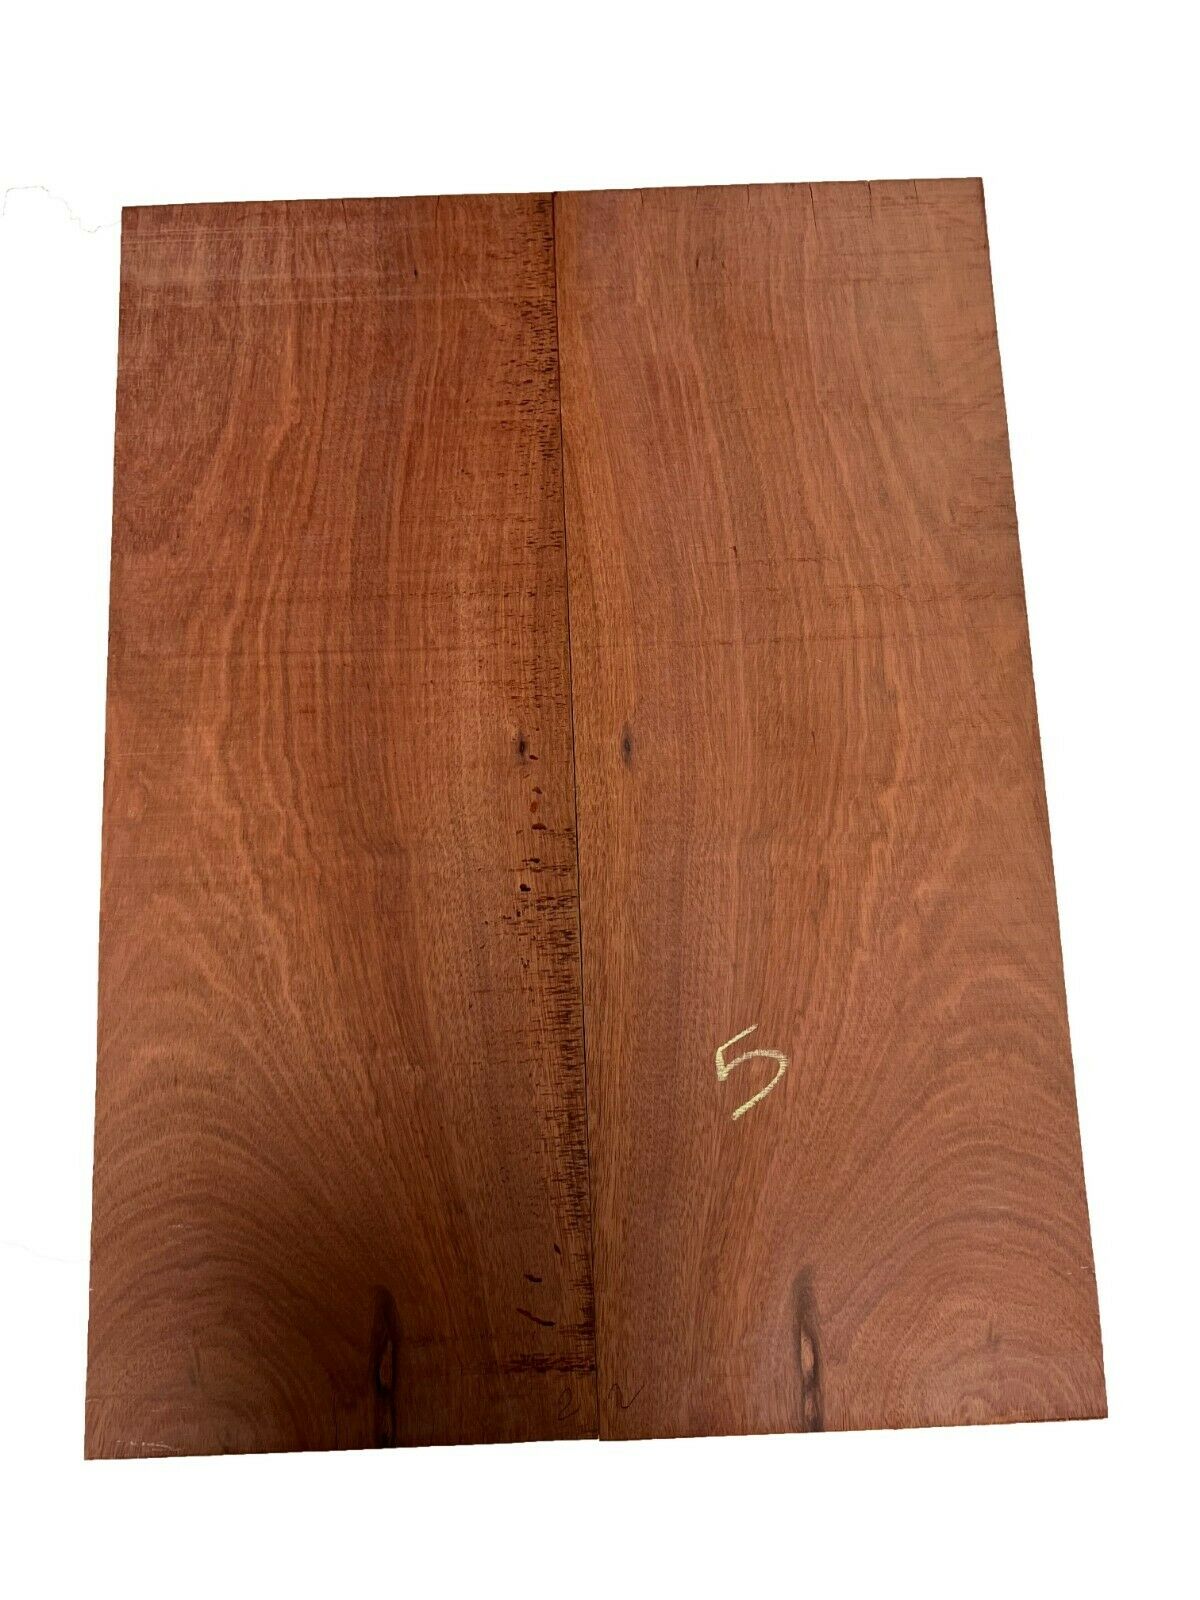 Bloodwood Electric Guitar Carved Tops/Plates | 21” x 7” x 5/8” | Book Matched Sets - Exotic Wood Zone - Buy online Across USA